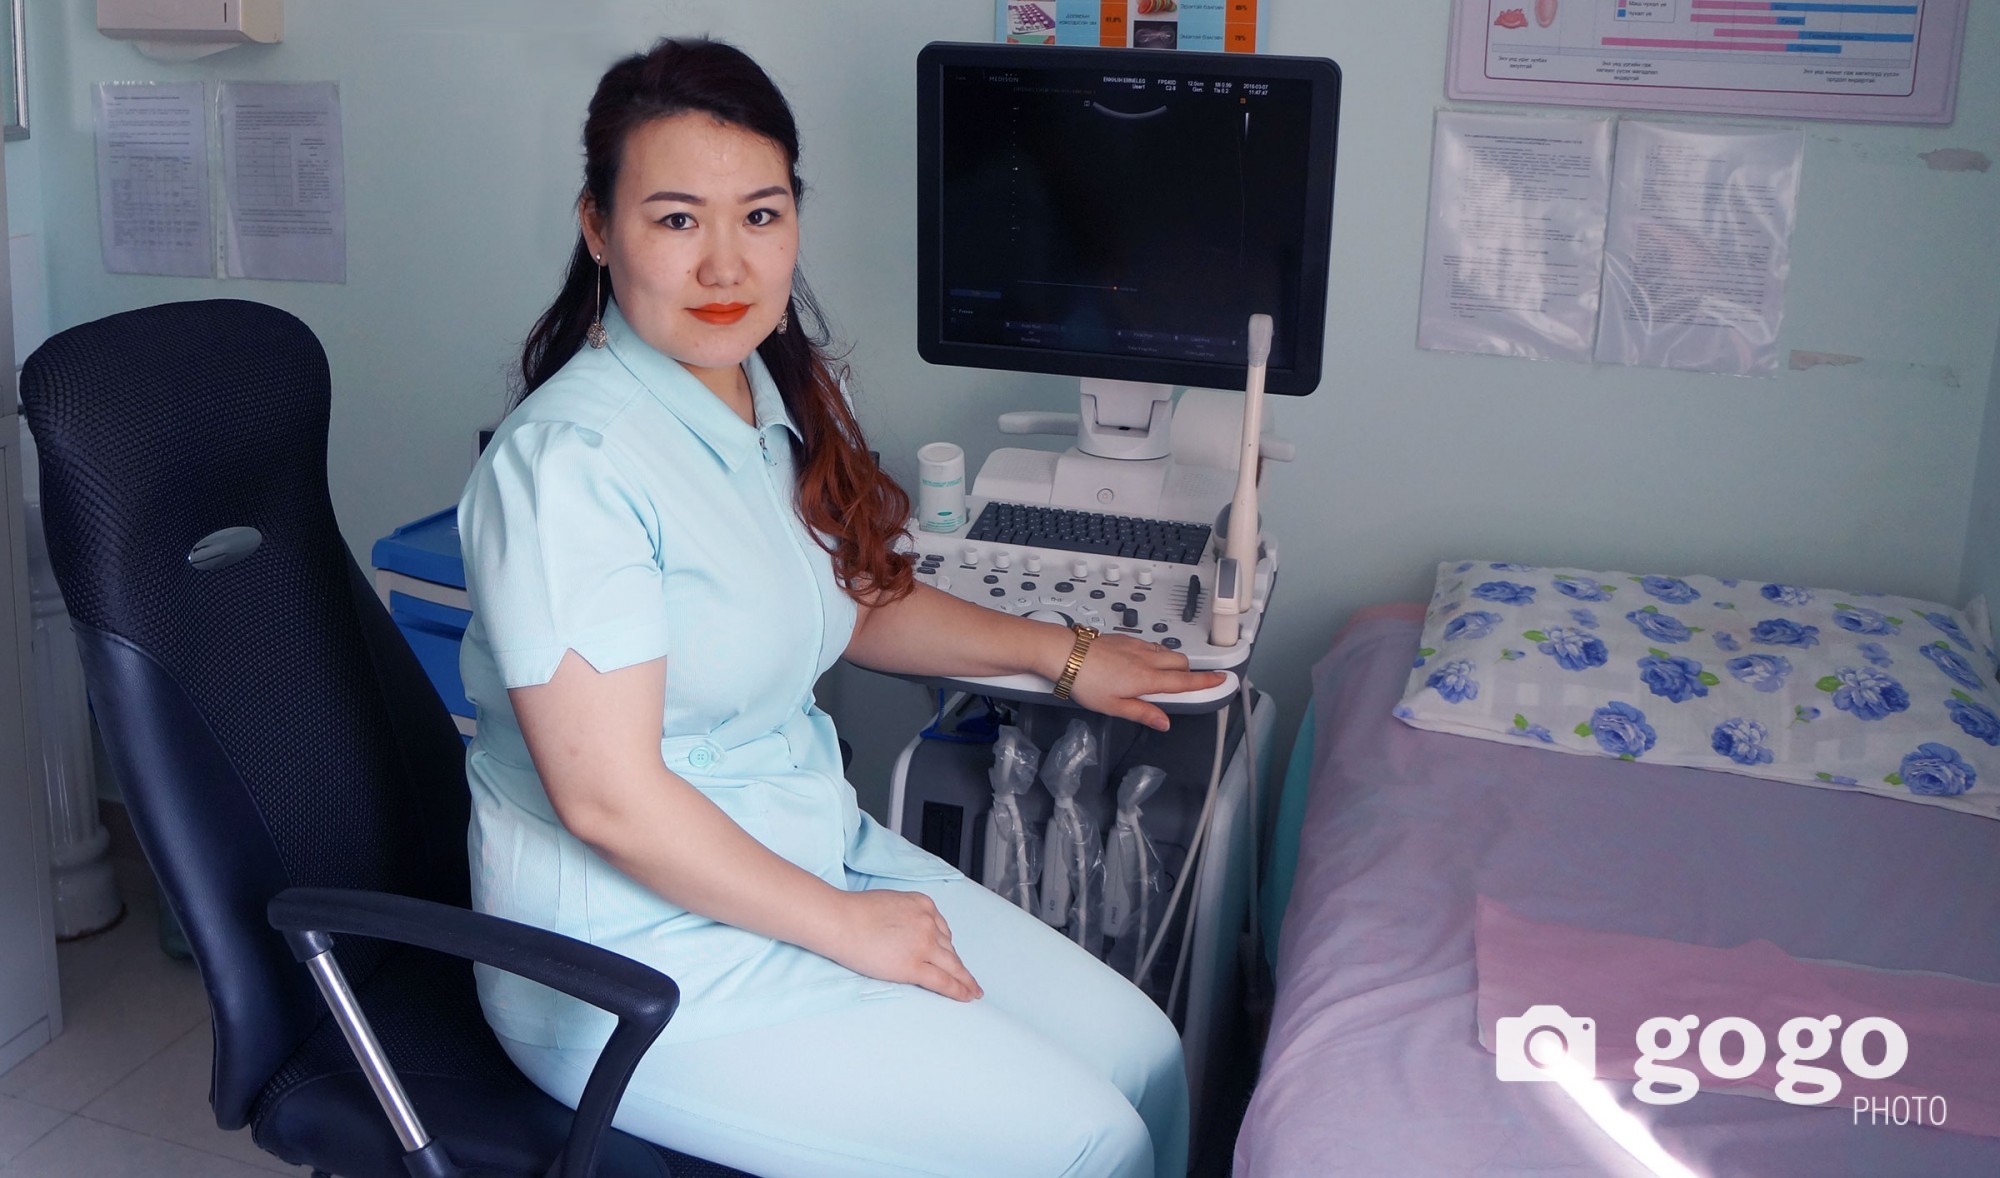 B.Bolortuya is a gynecologist at Enhjin women`s clinic. She wants young girls and women to improve their health knowledge and take good care for themselves.